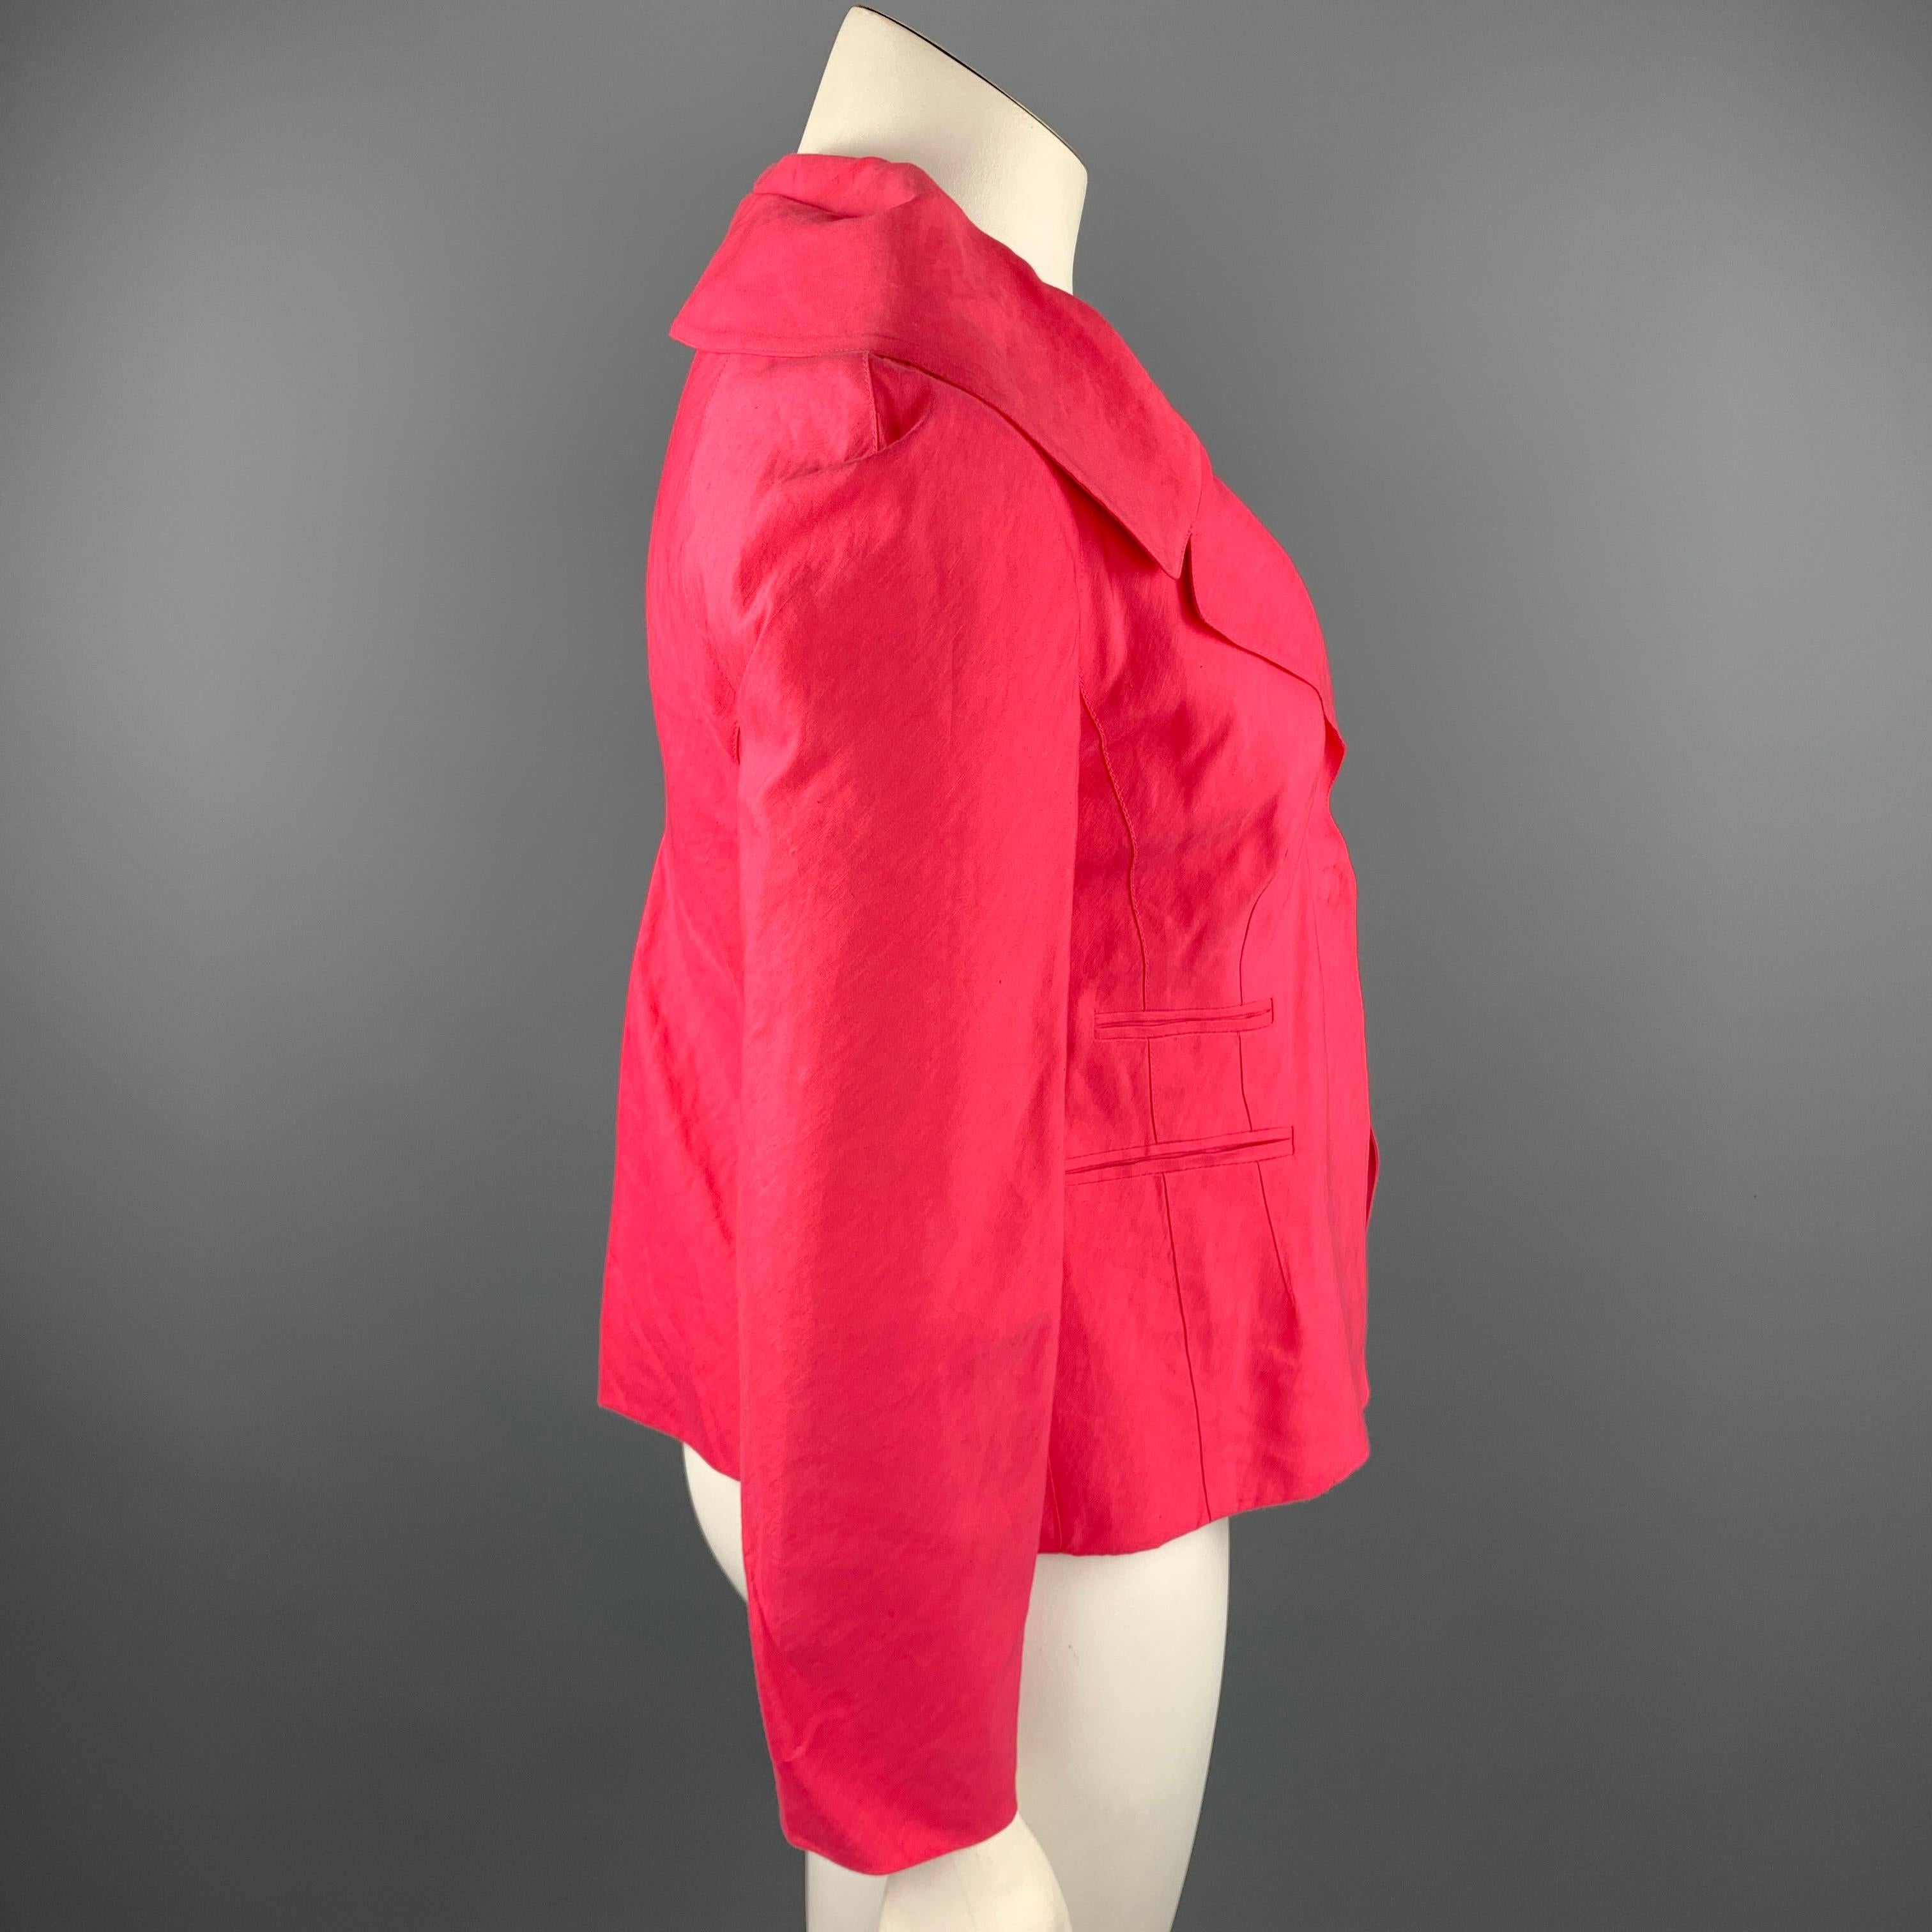 DONNA KARAN blazer comes in a pink linen with a full liner featuring a notch lapel, slit pockets, top stitching, and a two button closure. Made in USA.

Good Pre-Owned Condition.
Marked: US 10

Measurements:

Shoulder: 17 in. 
Bust: 36 in. 
Sleeve: